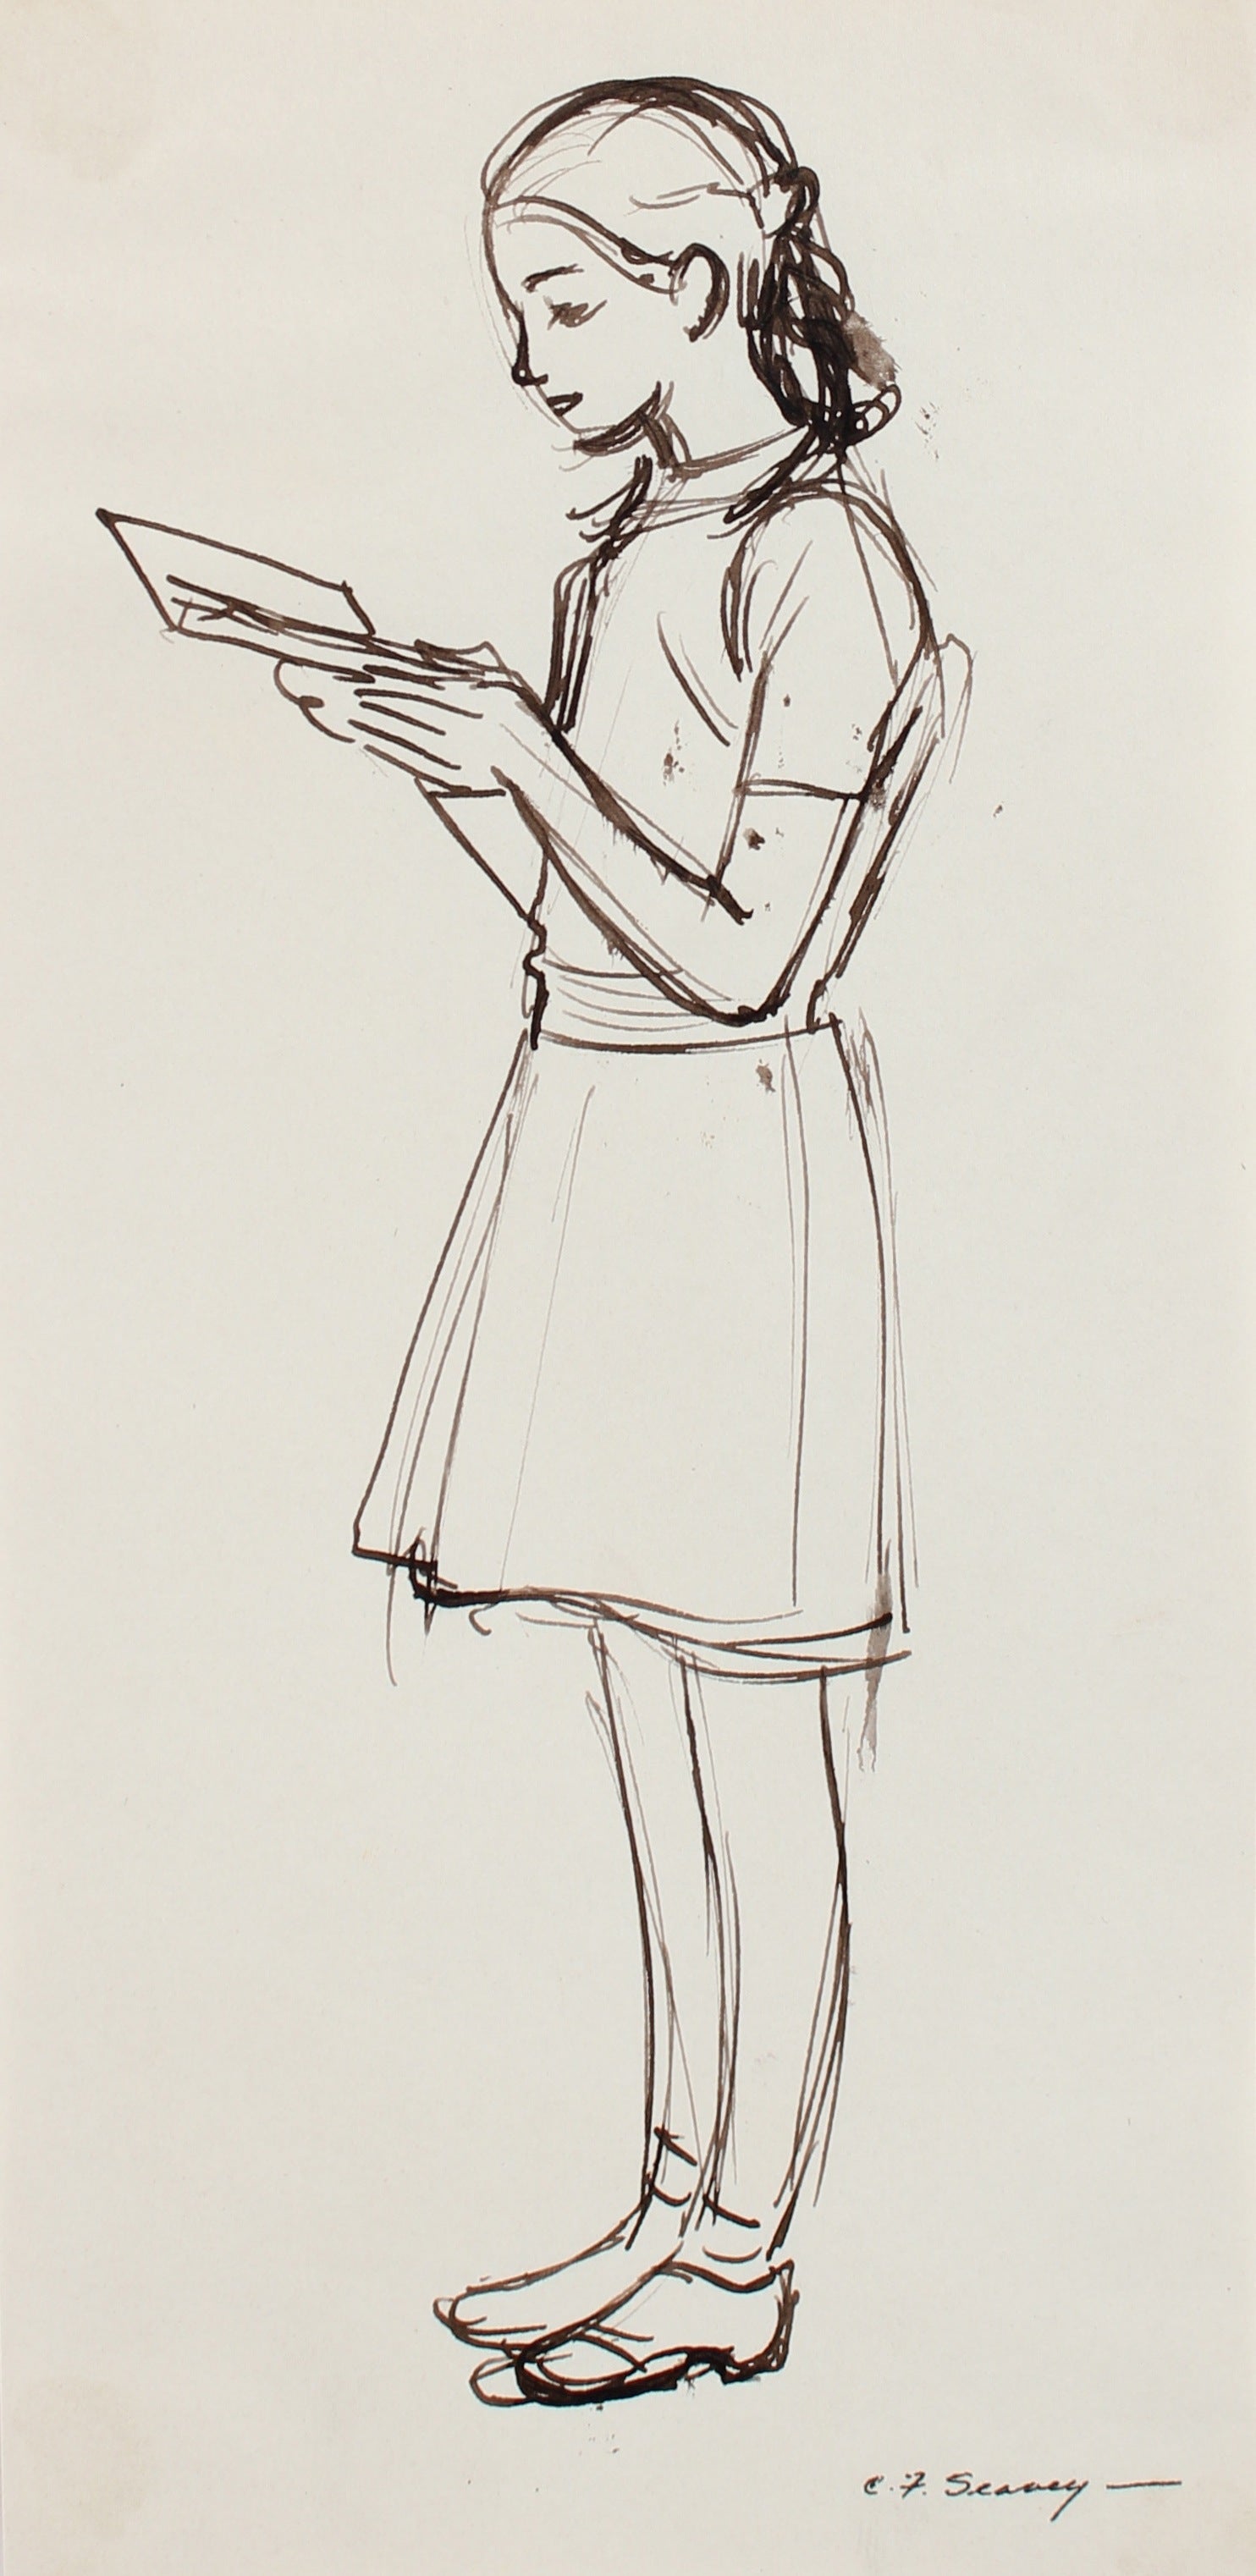 Standing Girl Reading Book<br>1930s-1940s Ink<br><br>#0011